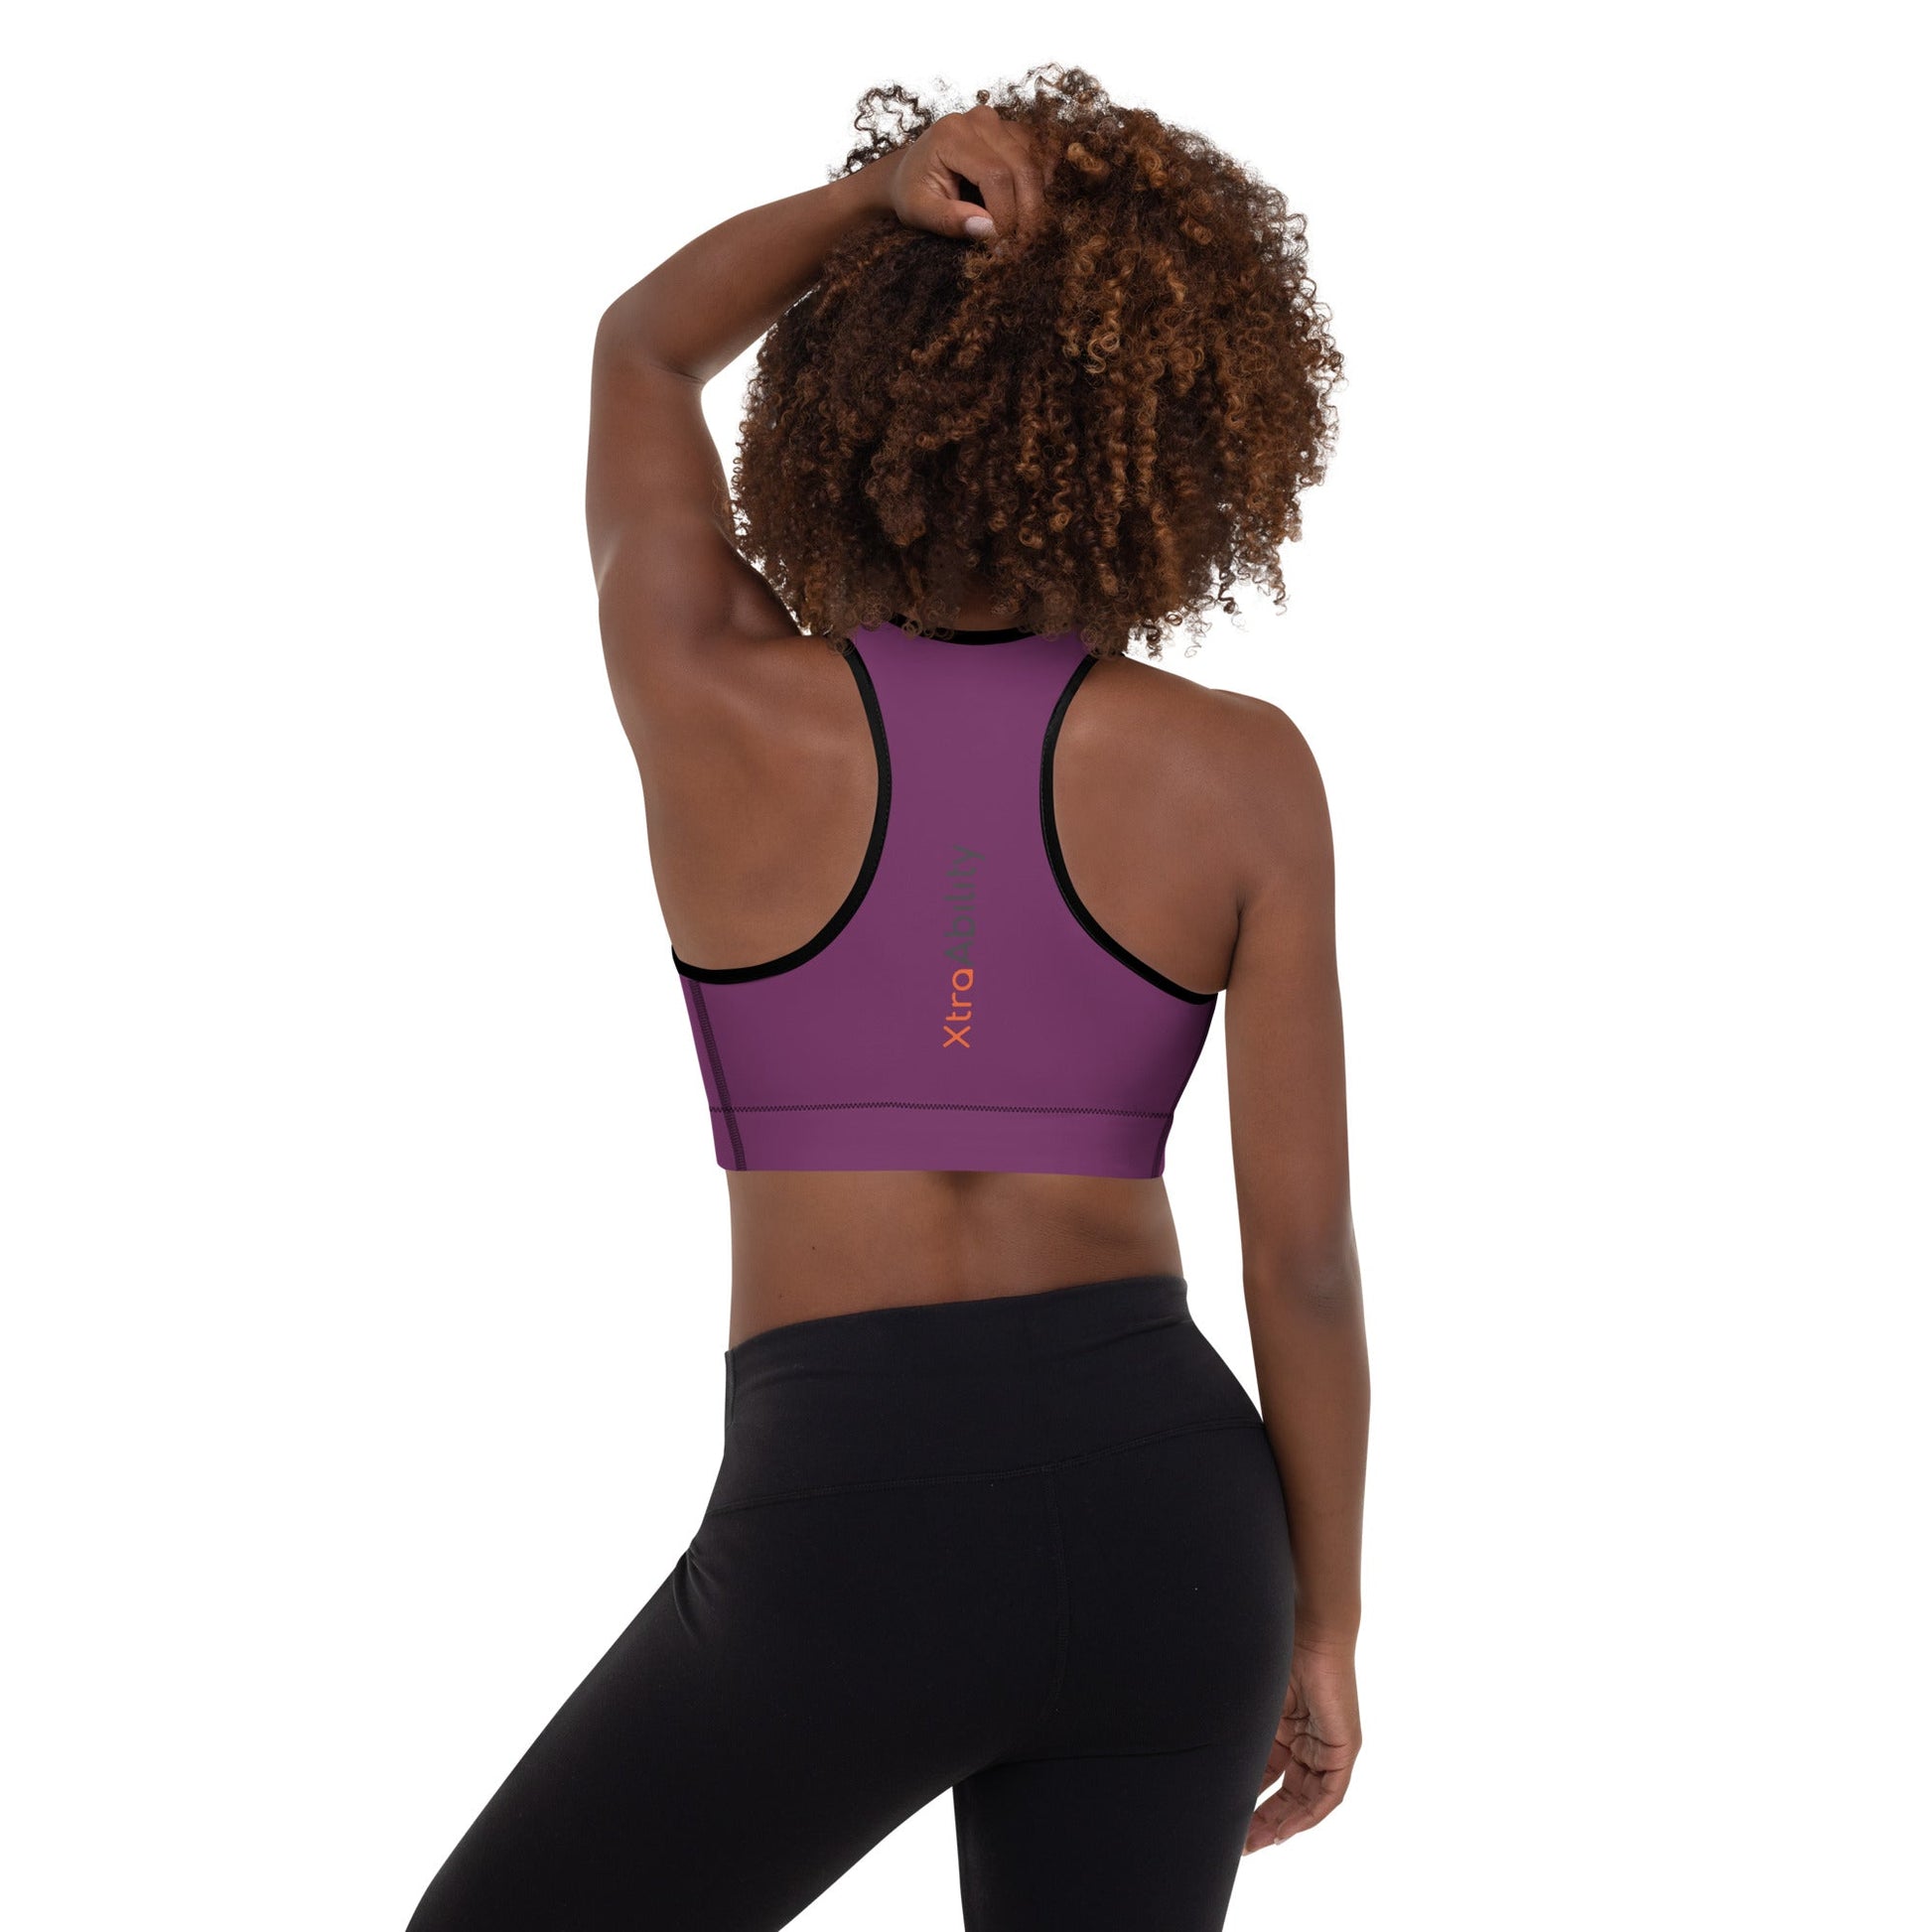 Sleek and Secure Padded Sports Bra - Optimal Support for Every Activity